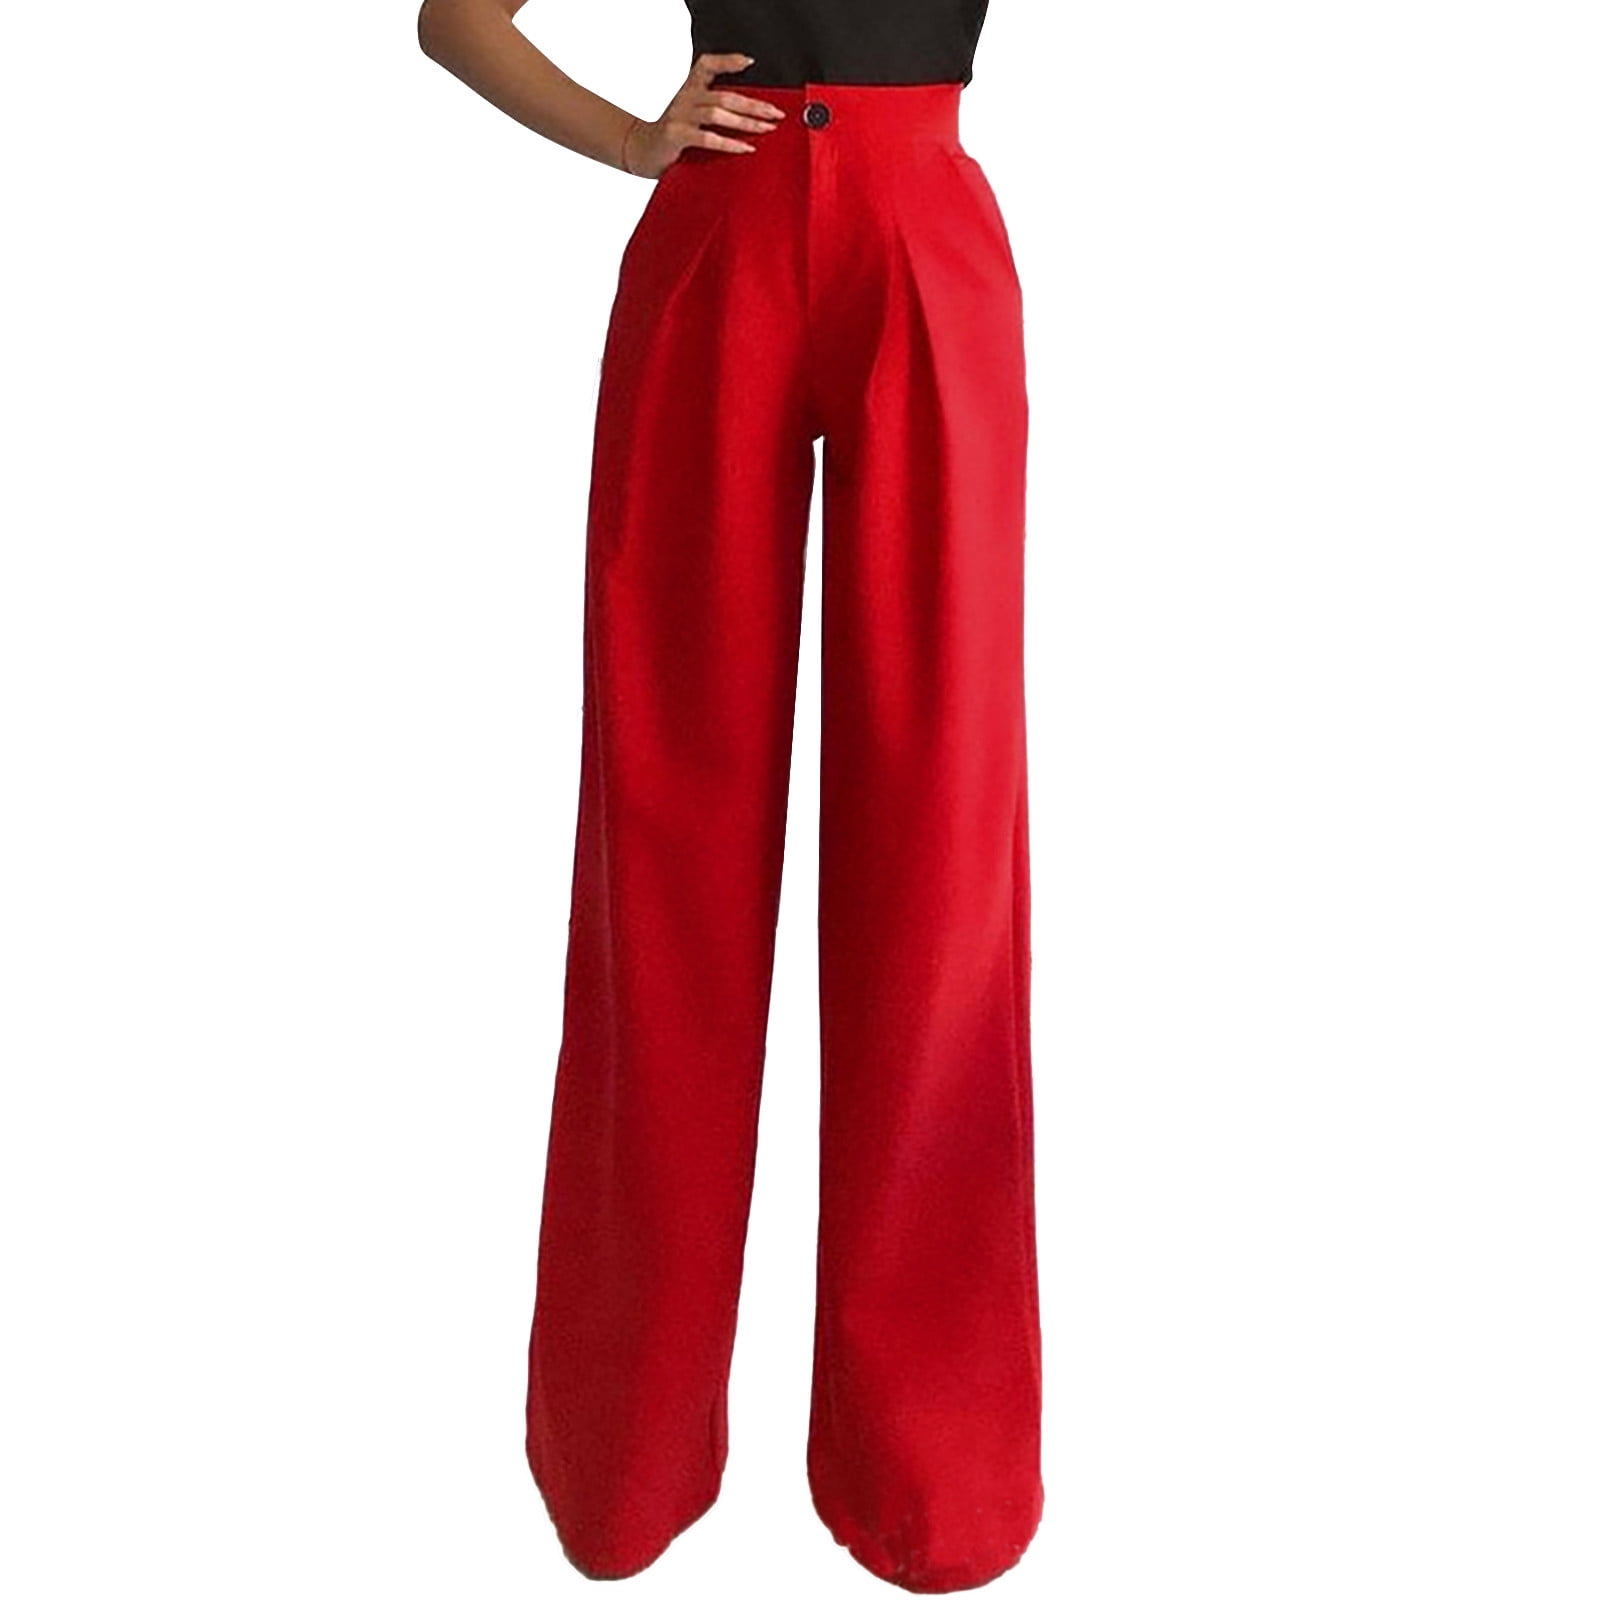 HSMQHJWE Puffy Pants Petite Dress Pants For Women Business Casual Womens  Solid Casual High Waisted Wide Leg Palazzo Pants Trousers Soft Women 